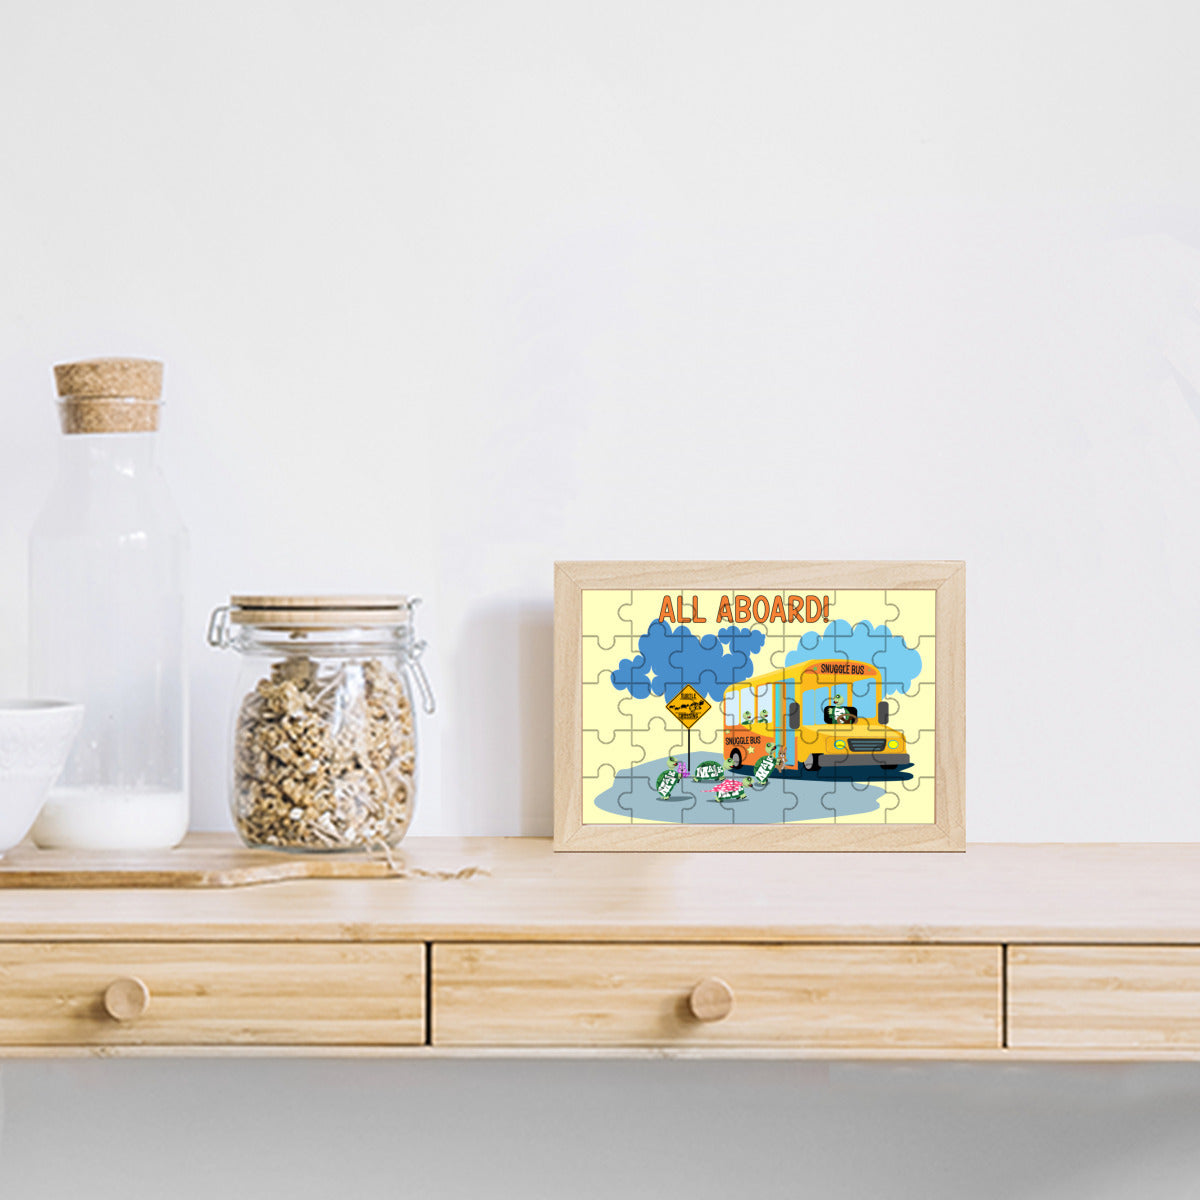 Picture Frame Puzzle "Snuggle Bus"